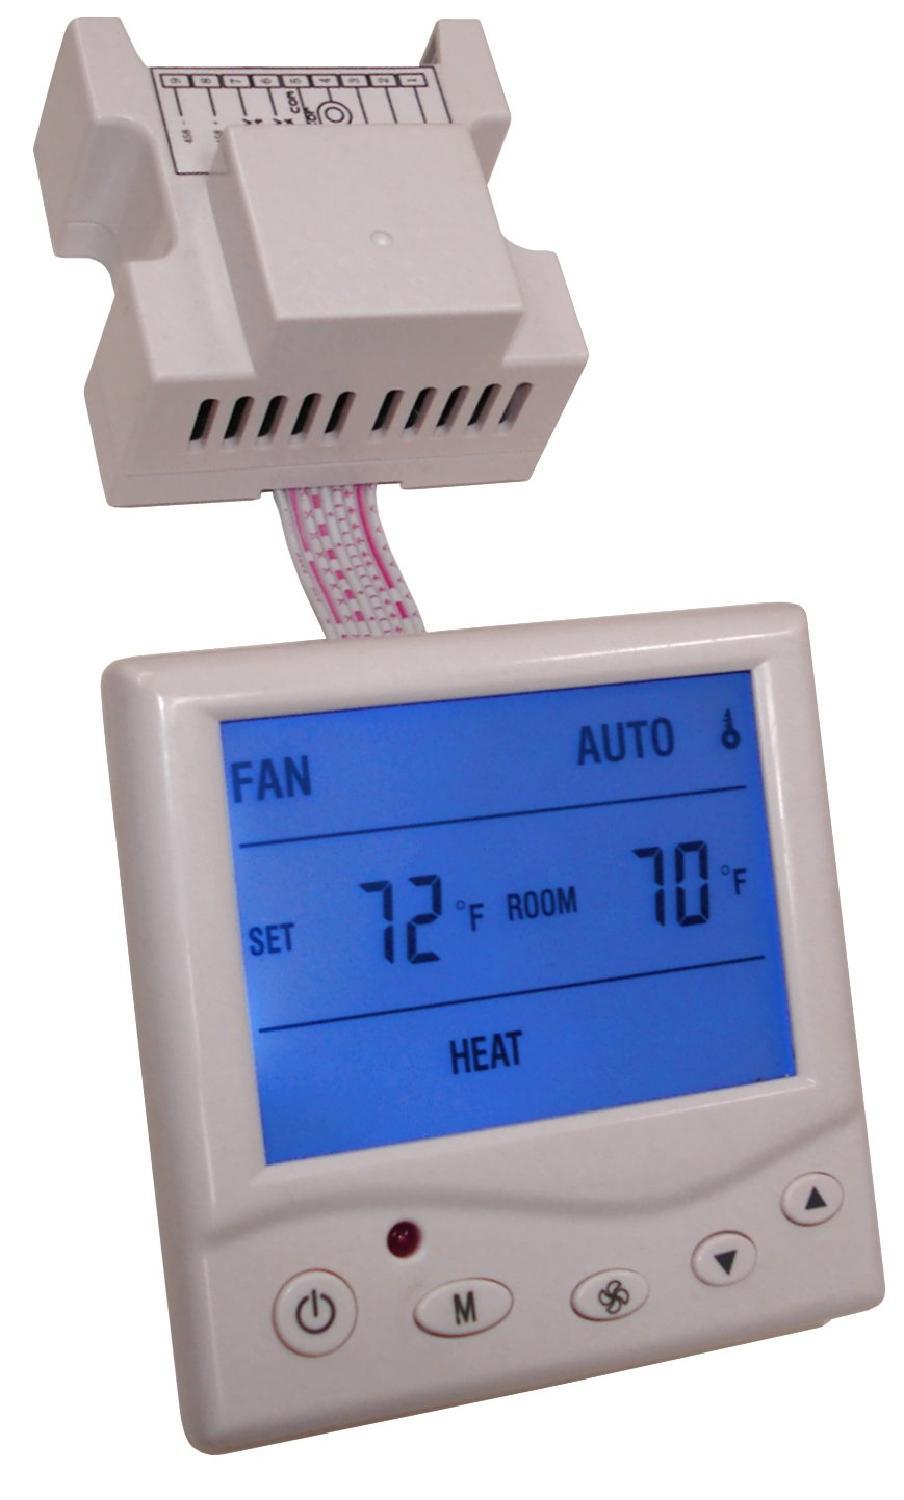 Description DataNab s it8 intelligent Thermostat is used to control the space temperature in residential, commercial, and industrial environments by controlling fan coils, heat pumps, VAV boxes,